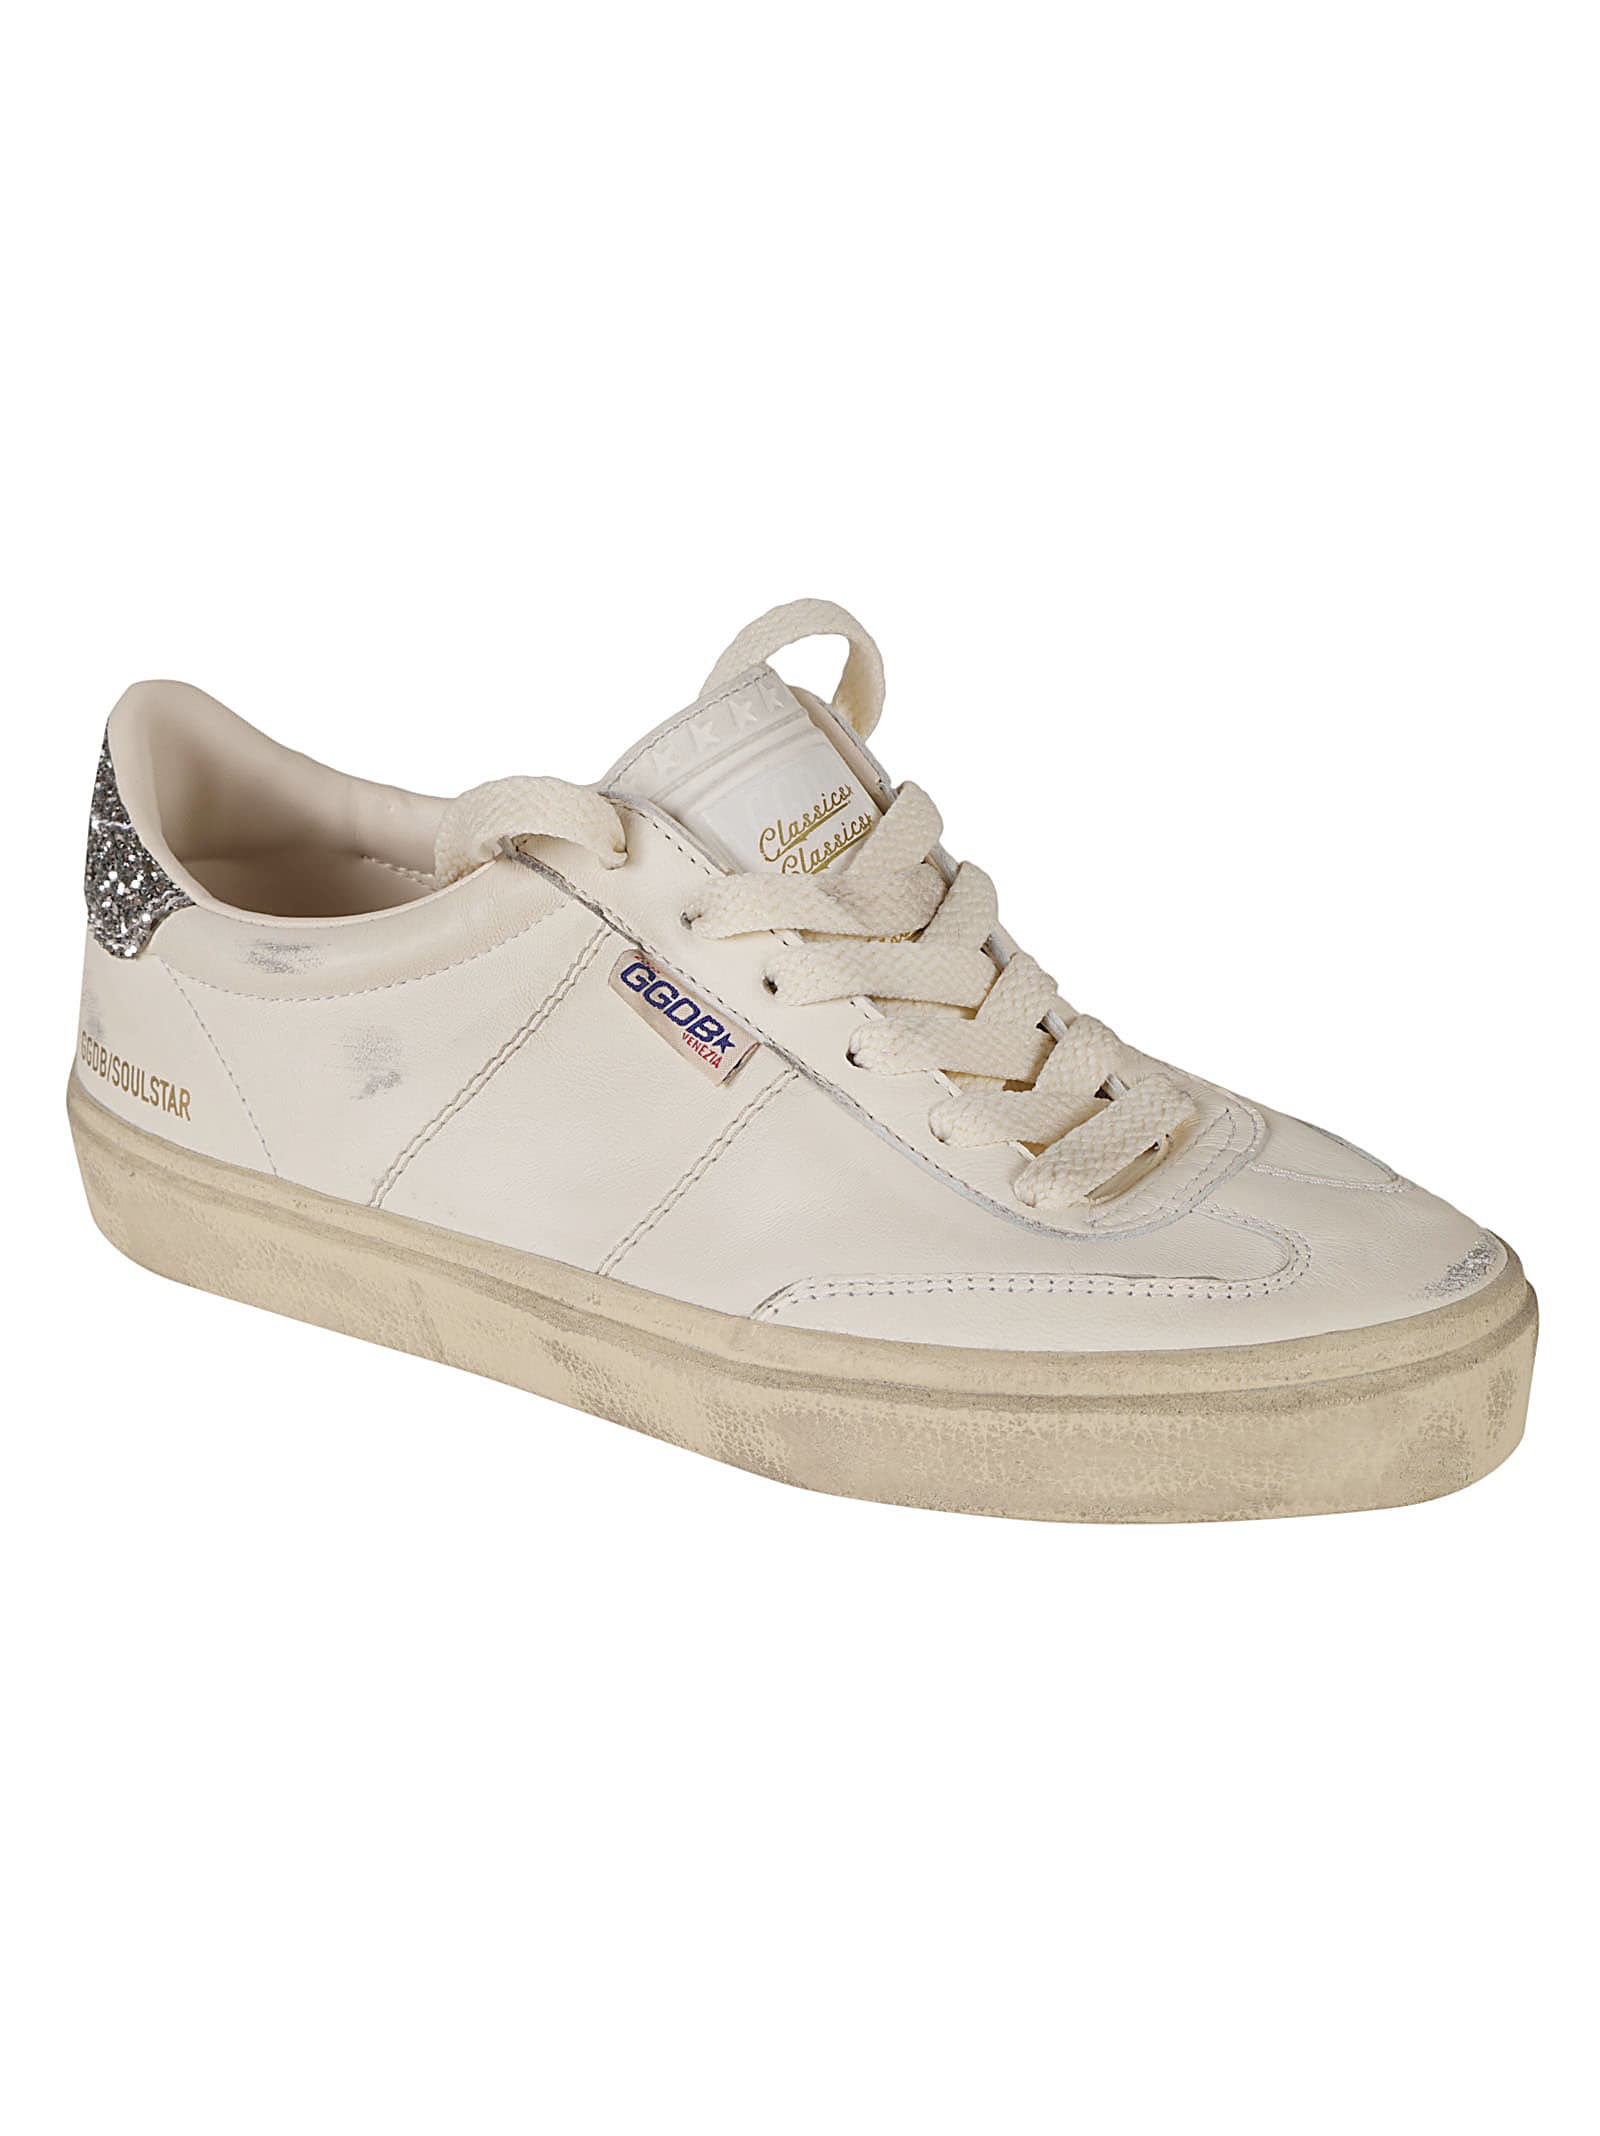 Shop Golden Goose Soul Star Sneakers In White/silver